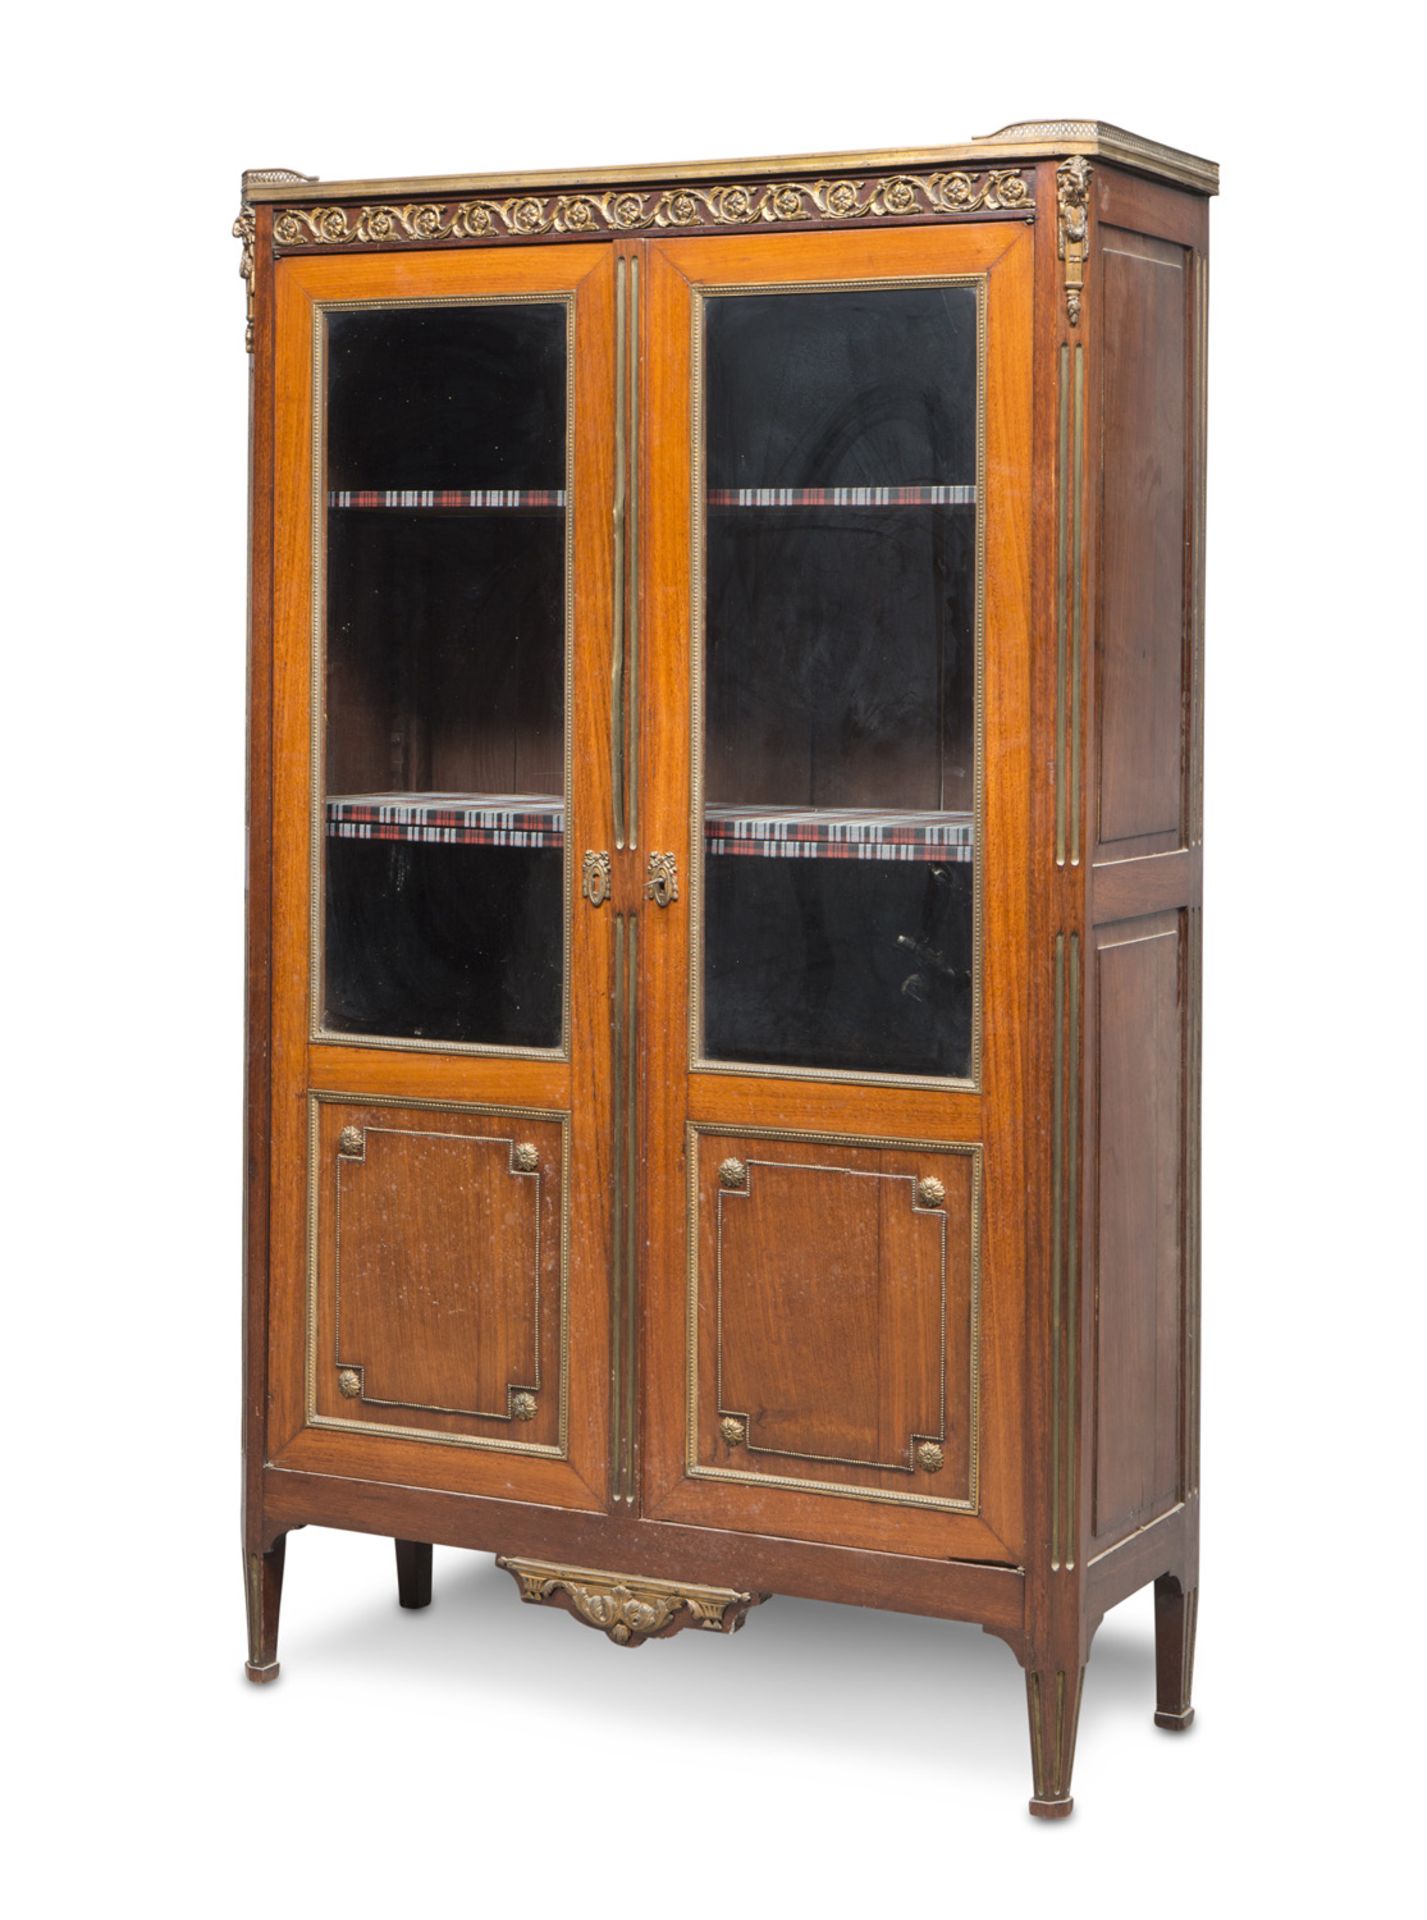 BEAUTIFUL CABINET IN SOLIDMAHOGANY, FRANCE LATE 18TH CENTURY with two doors on the front and tapered